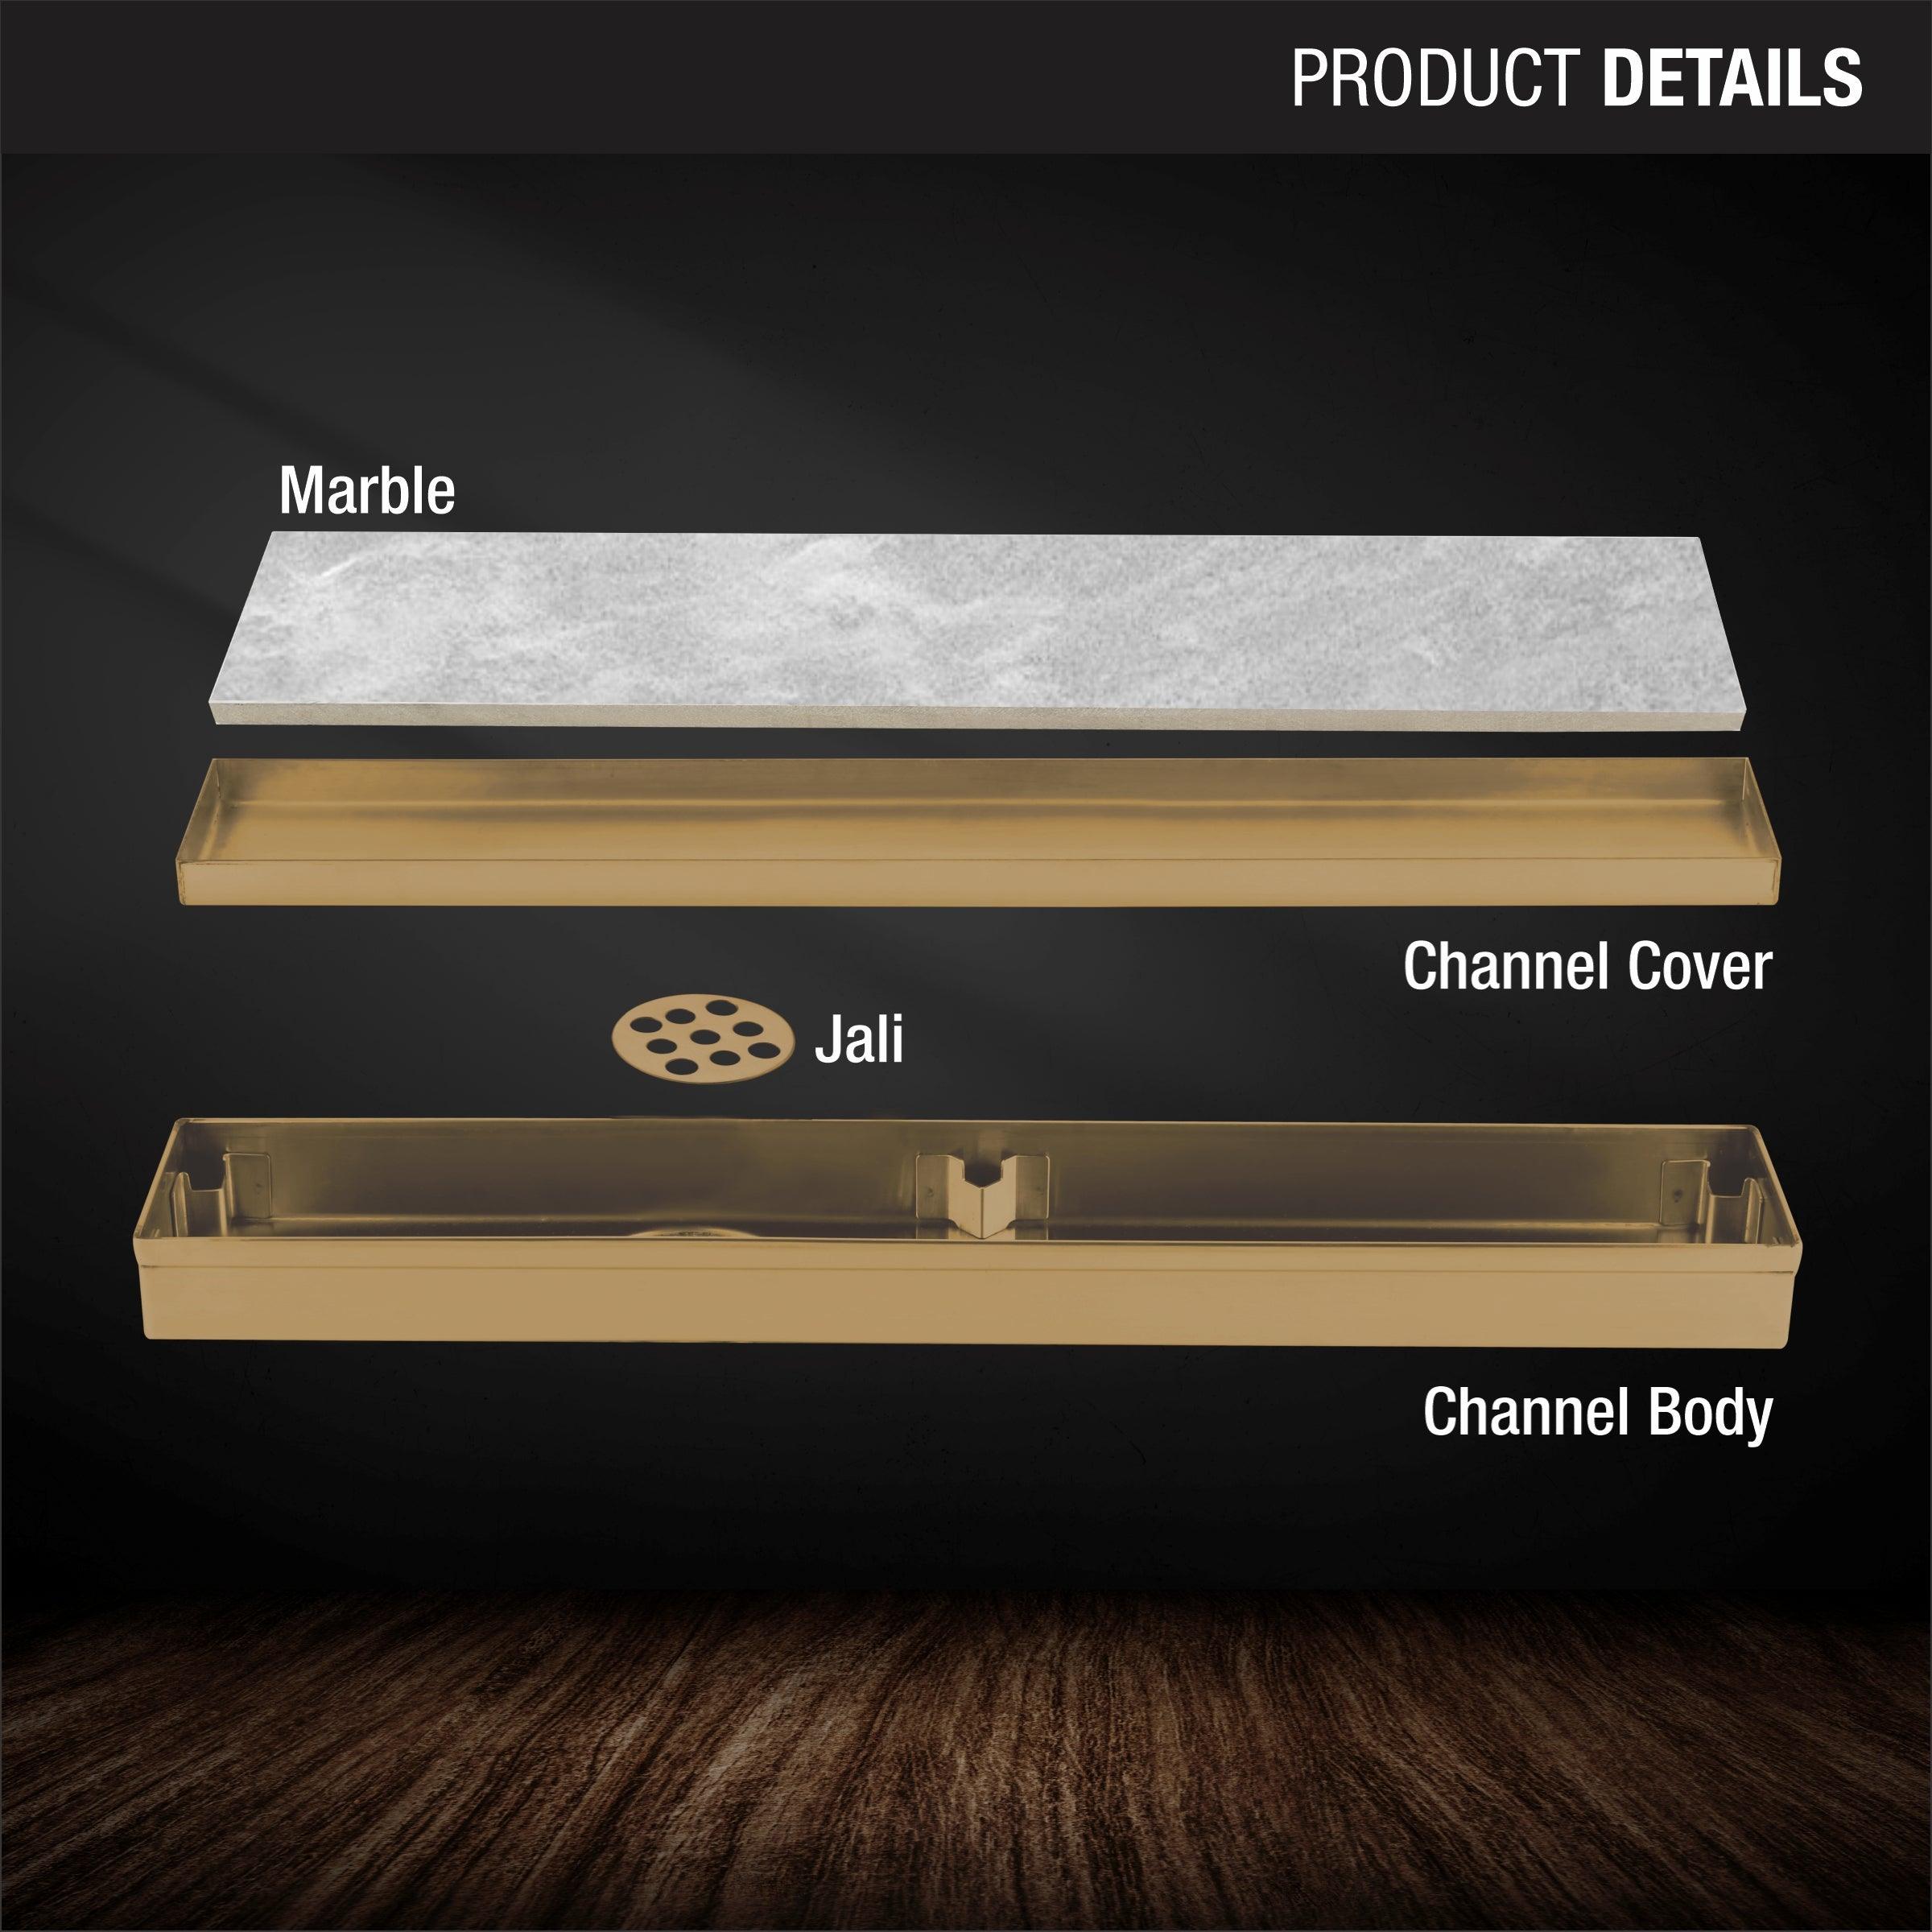 Marble Insert Shower Drain Channel - Yellow Gold (40 x 2 Inches) product details